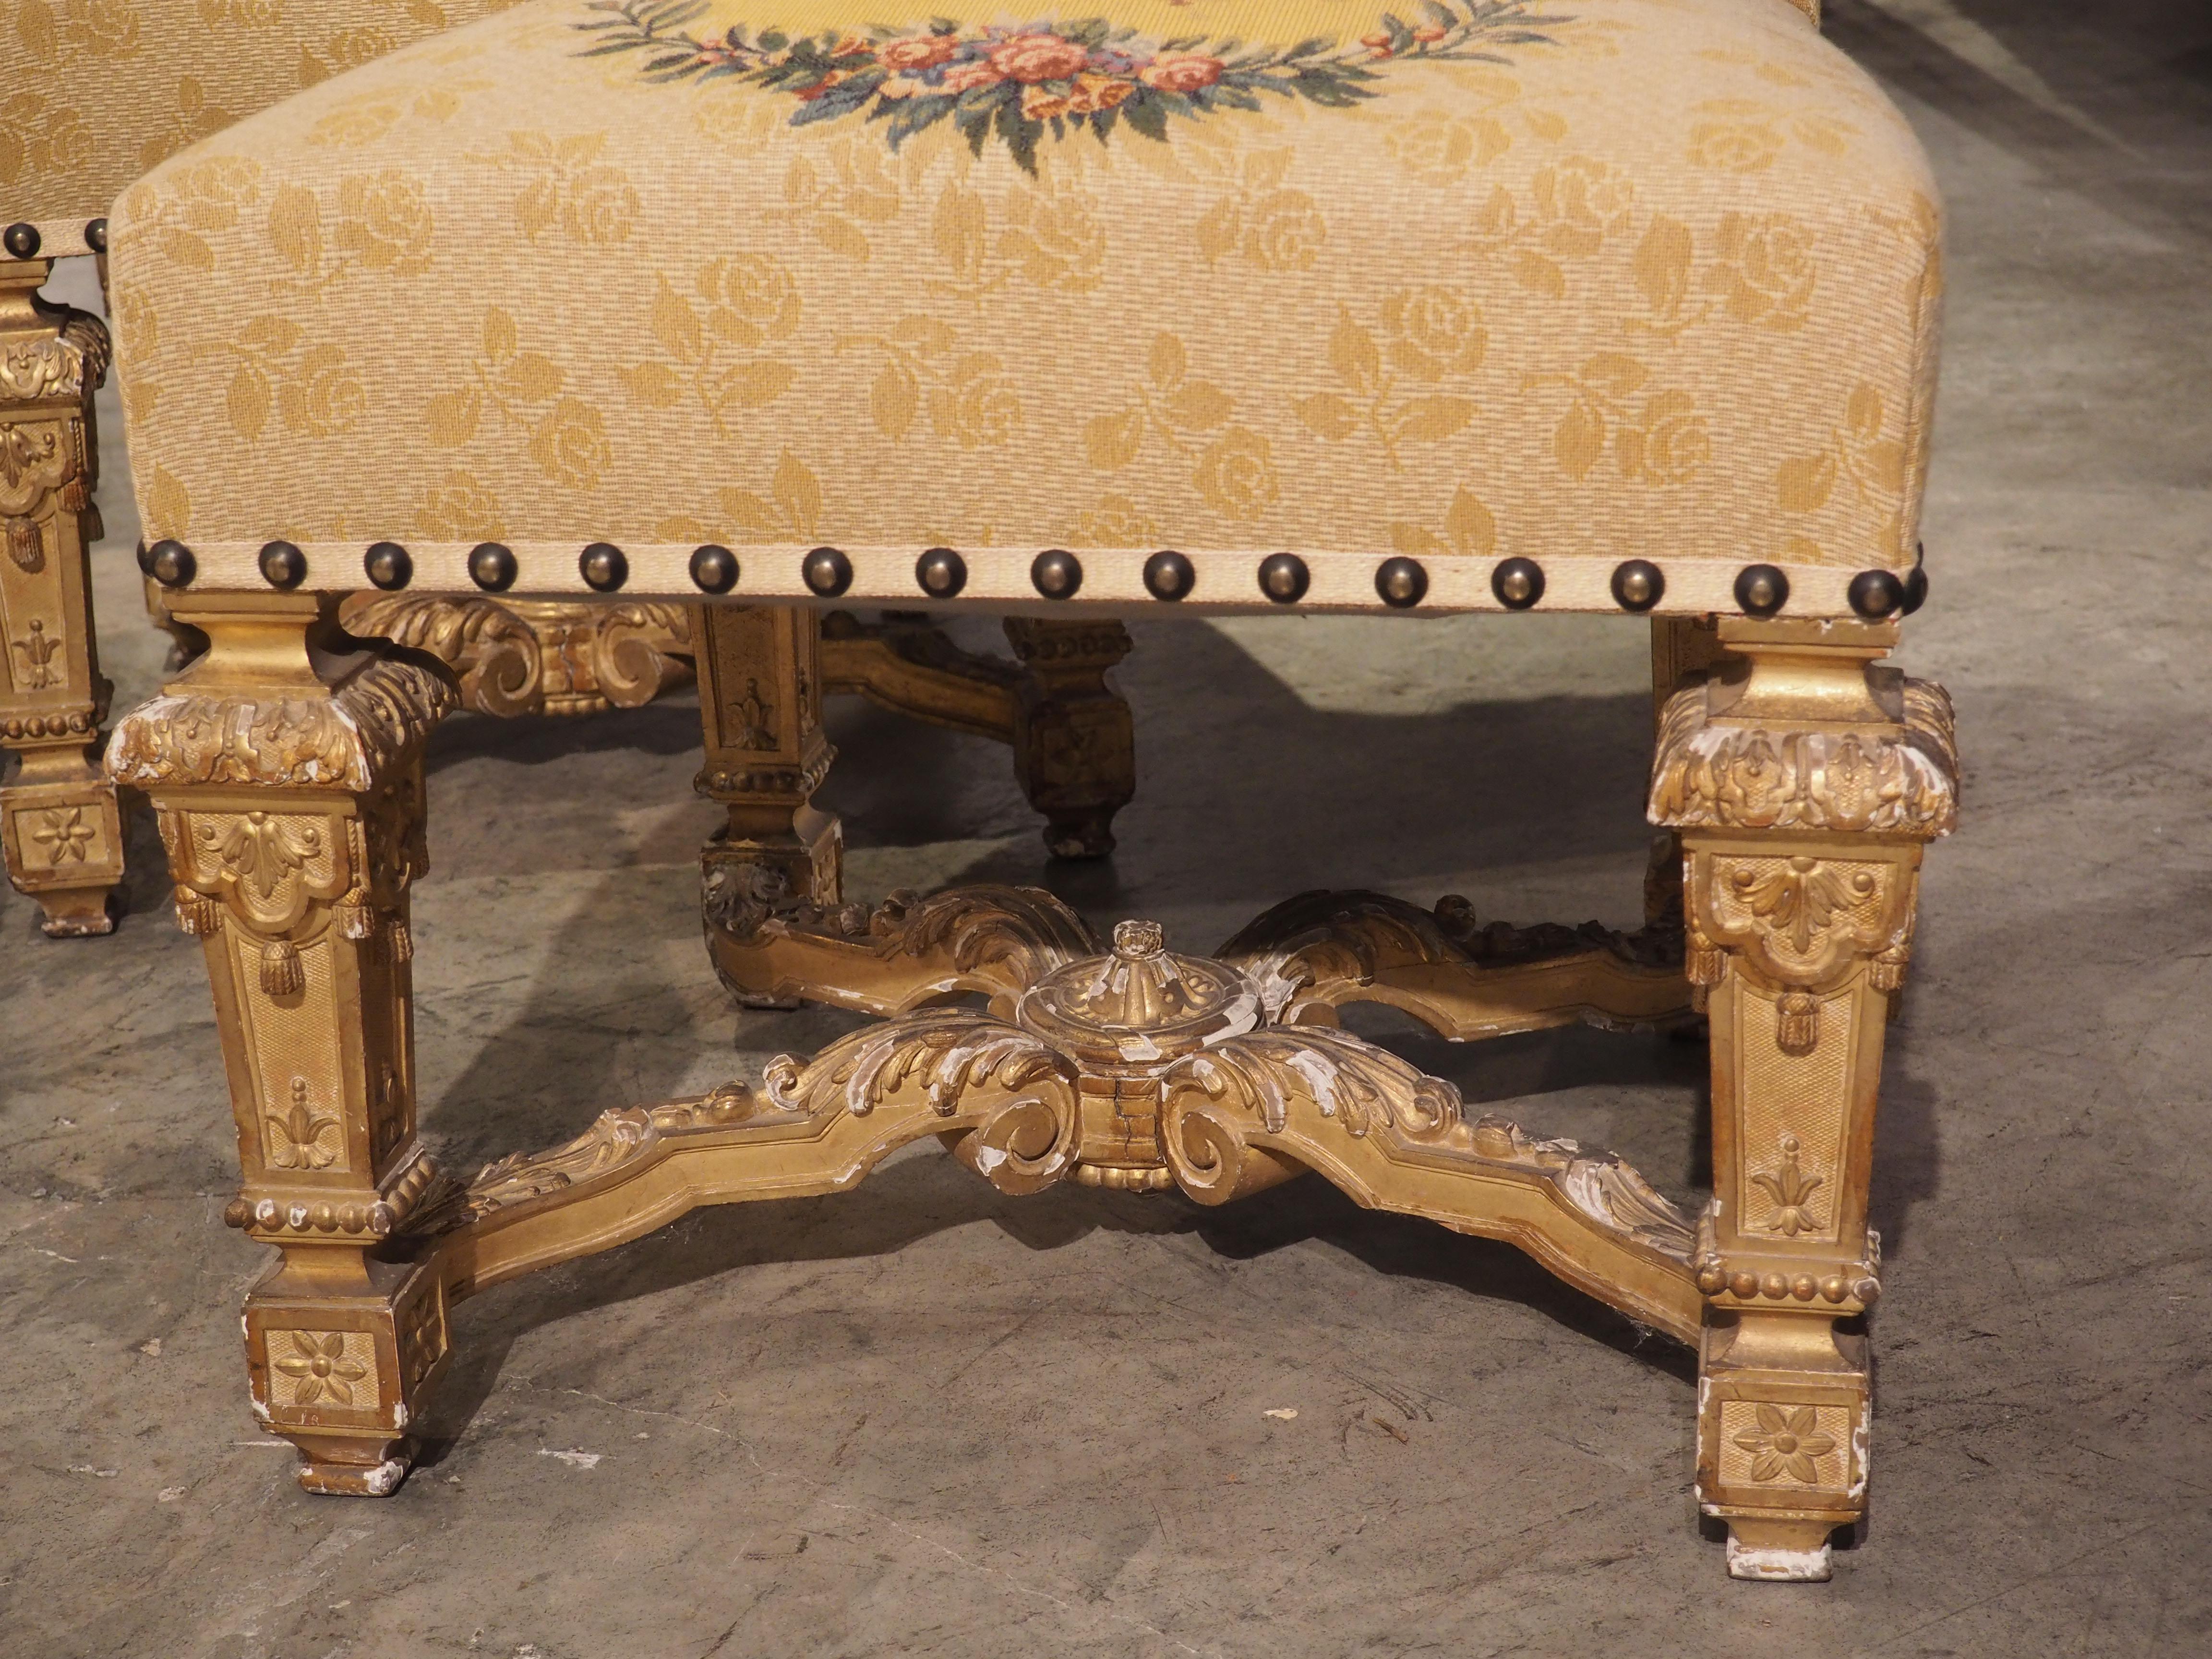 Upholstery Rare Seven-Piece Louis XIV Style Giltwood Salon Suite from France, circa 1880 For Sale